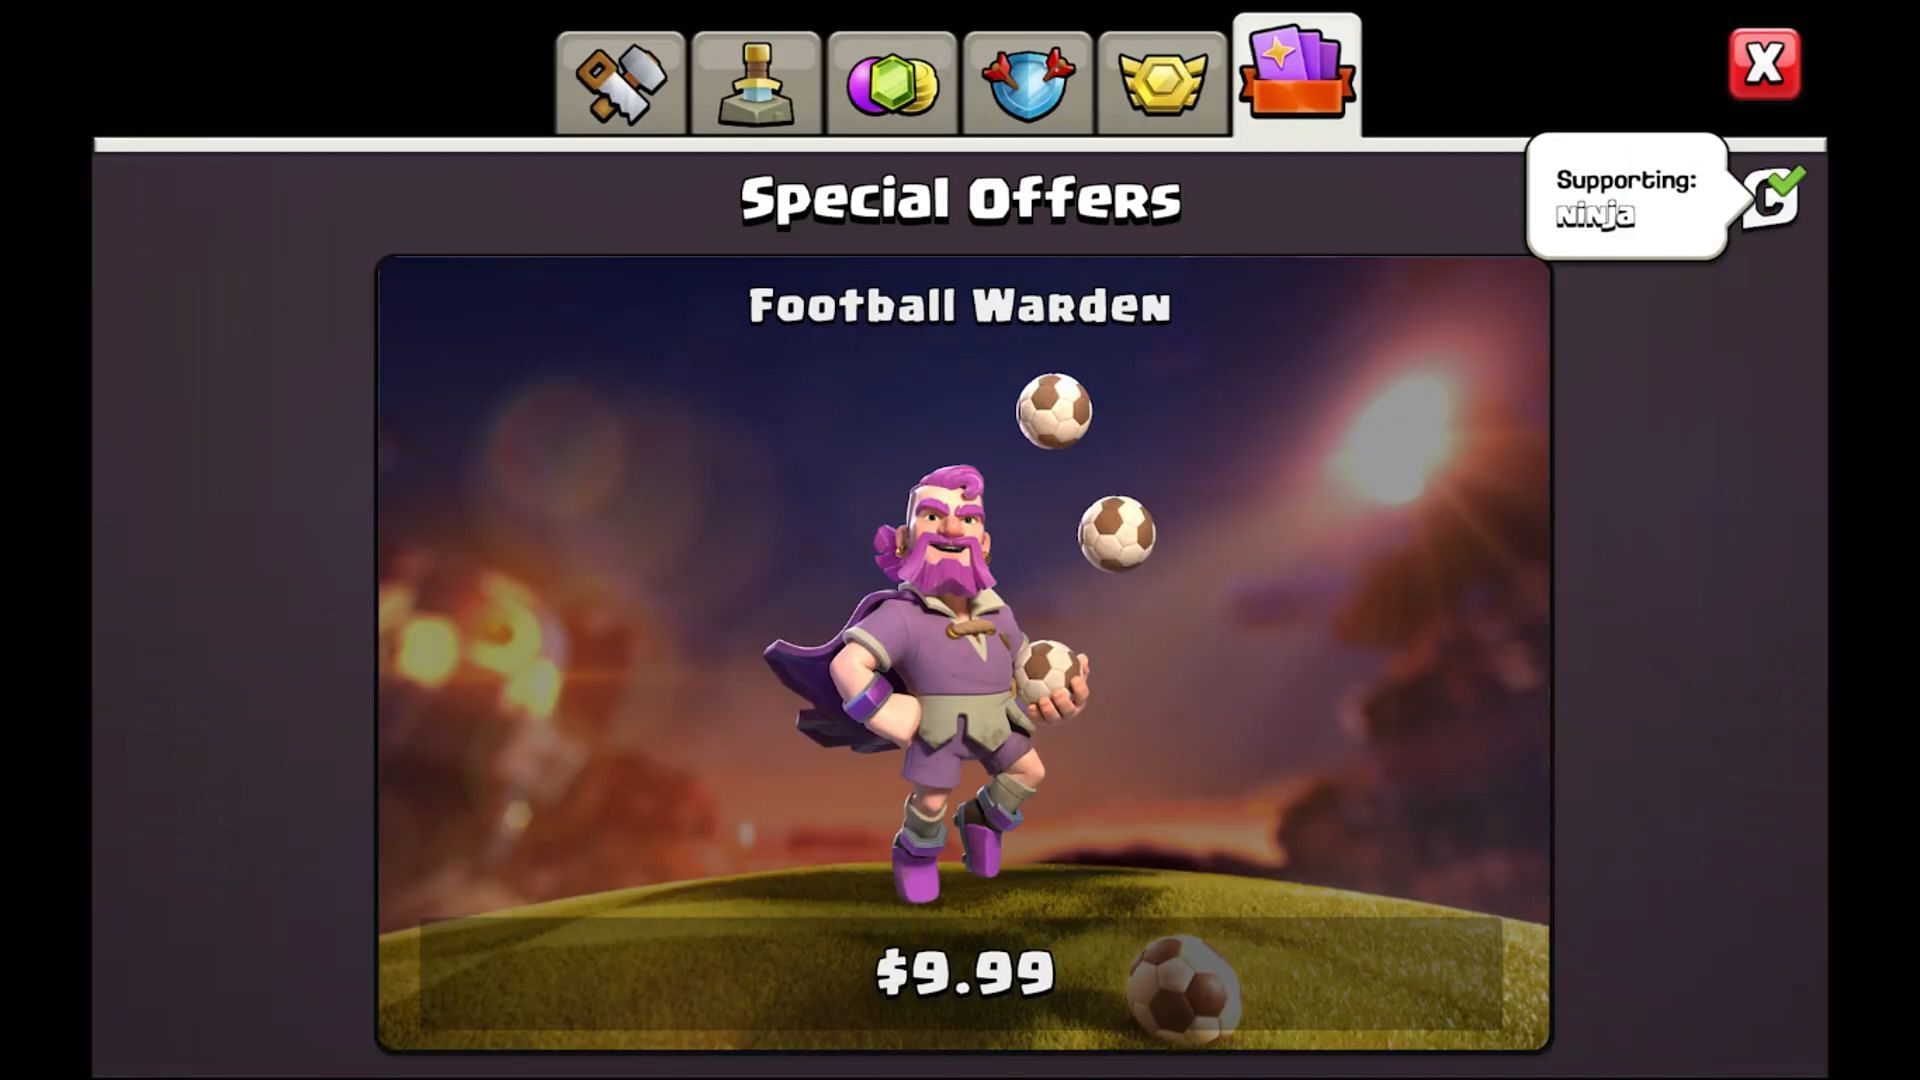 Required cost (Image via Supercell)